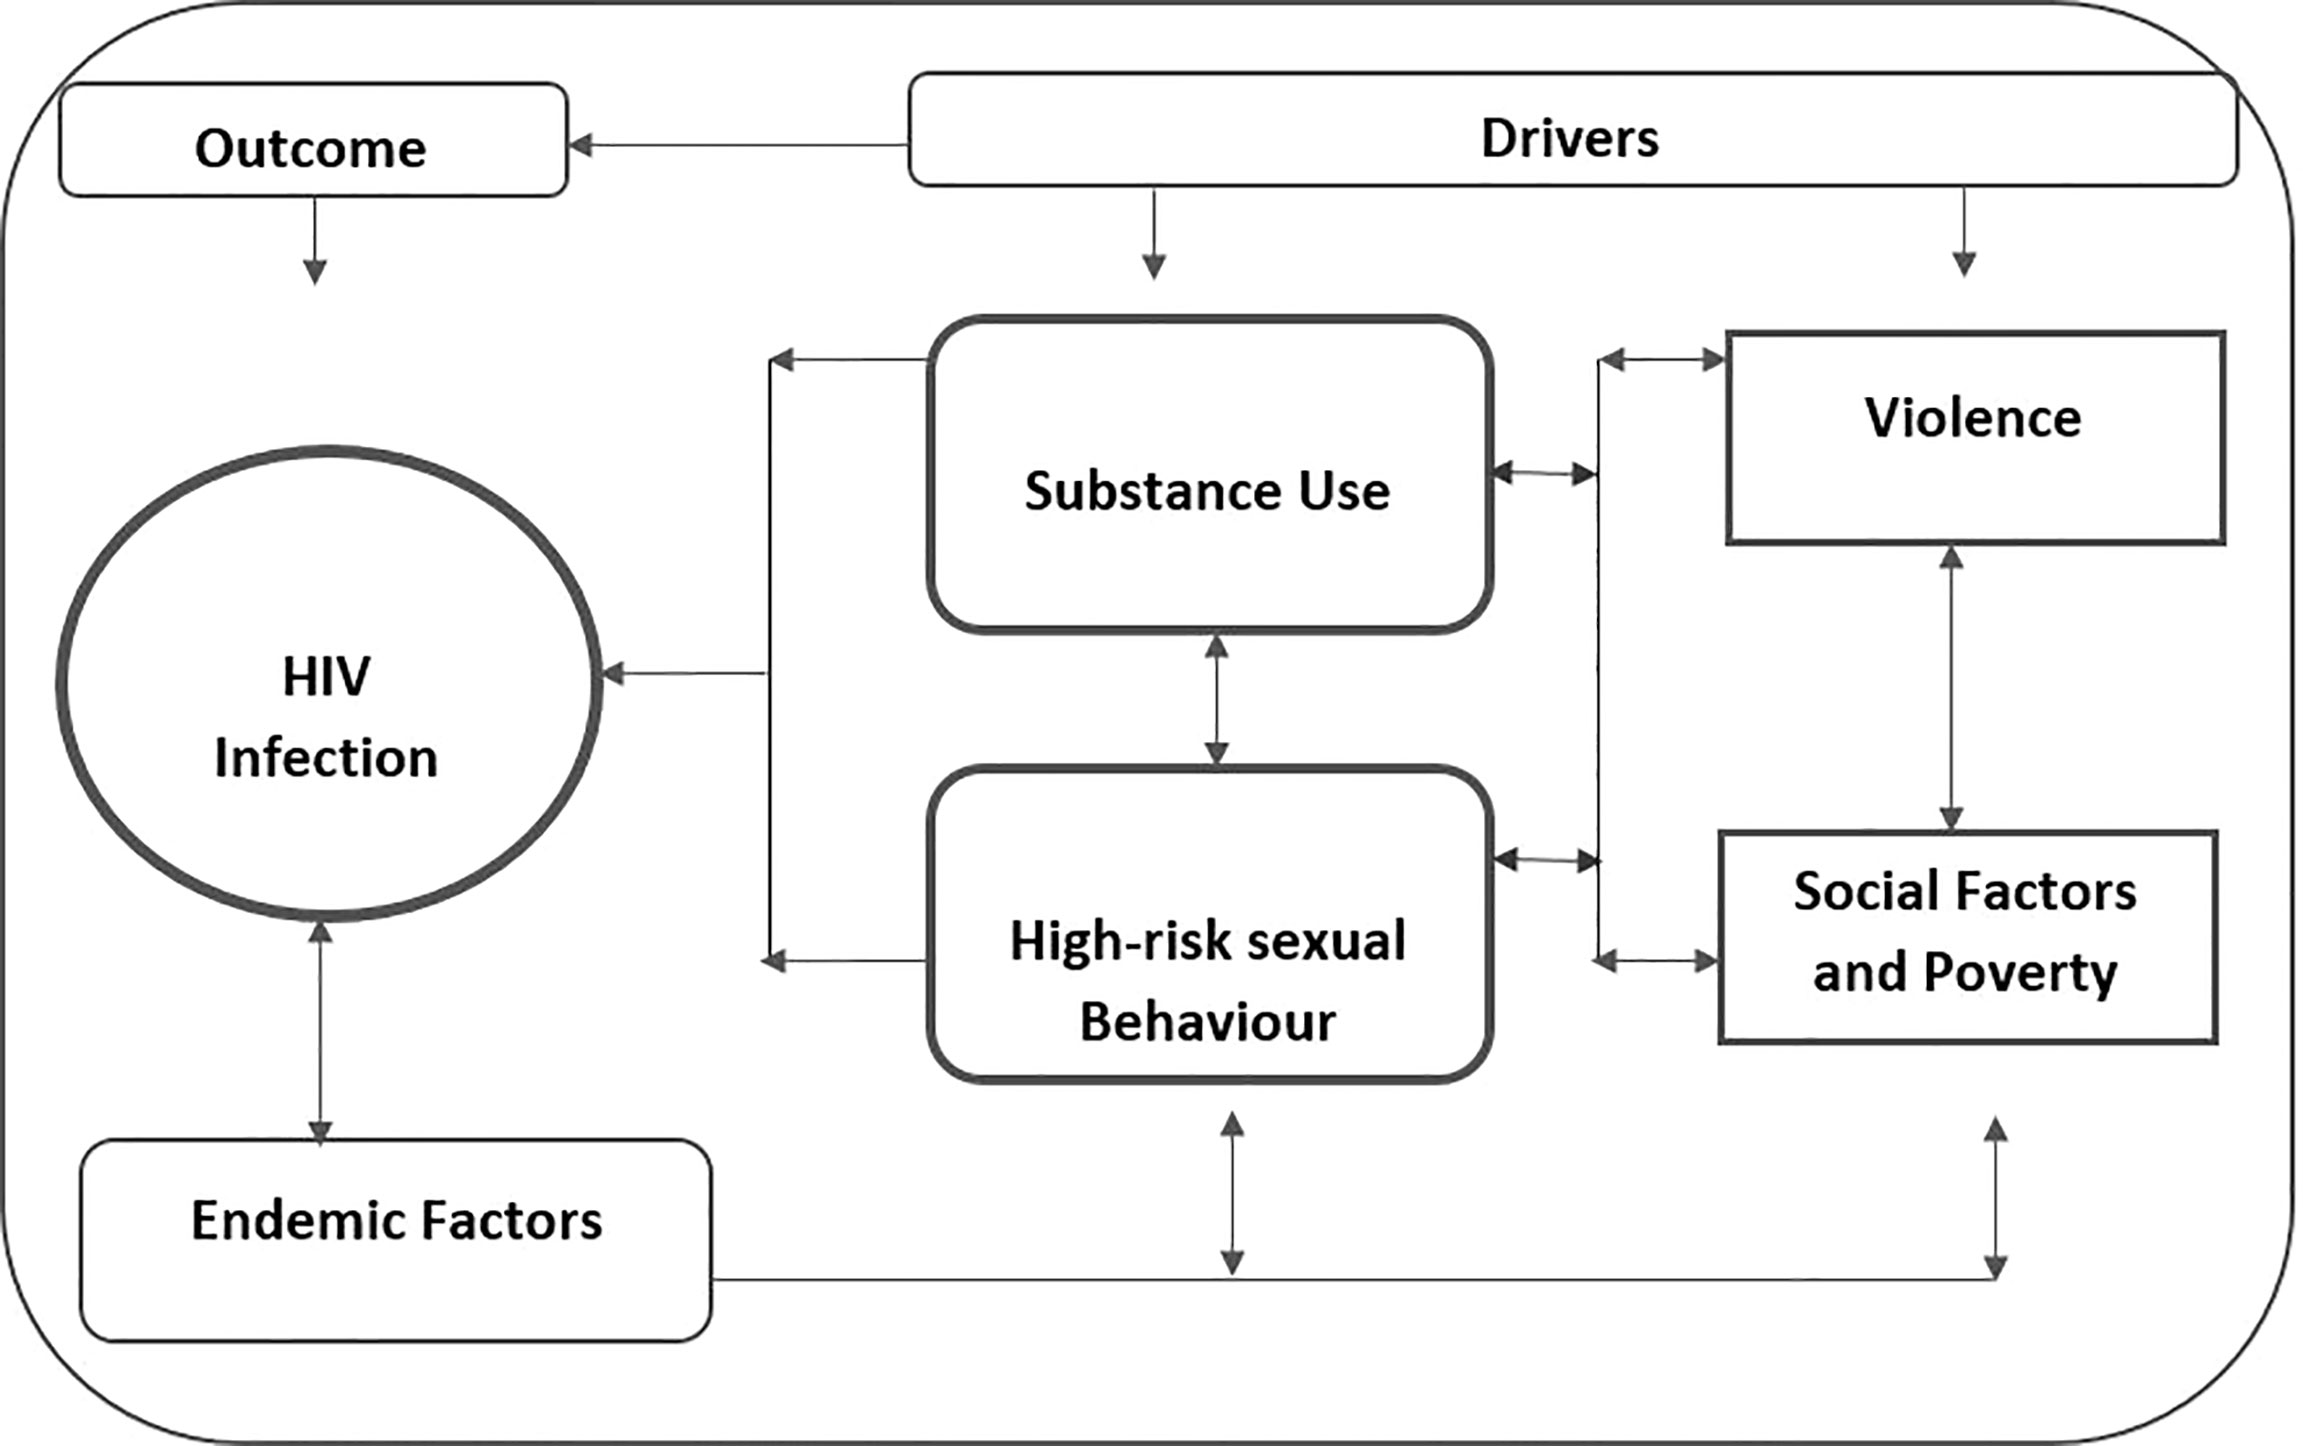 Frontiers The Syndemic of Substance Use, High-Risk Sexual Behavior, and Violence A Qualitative Exploration of the Intersections and Implications for HIV/STI Prevention Among Key Populations in Lagos, Nigeria photo pic